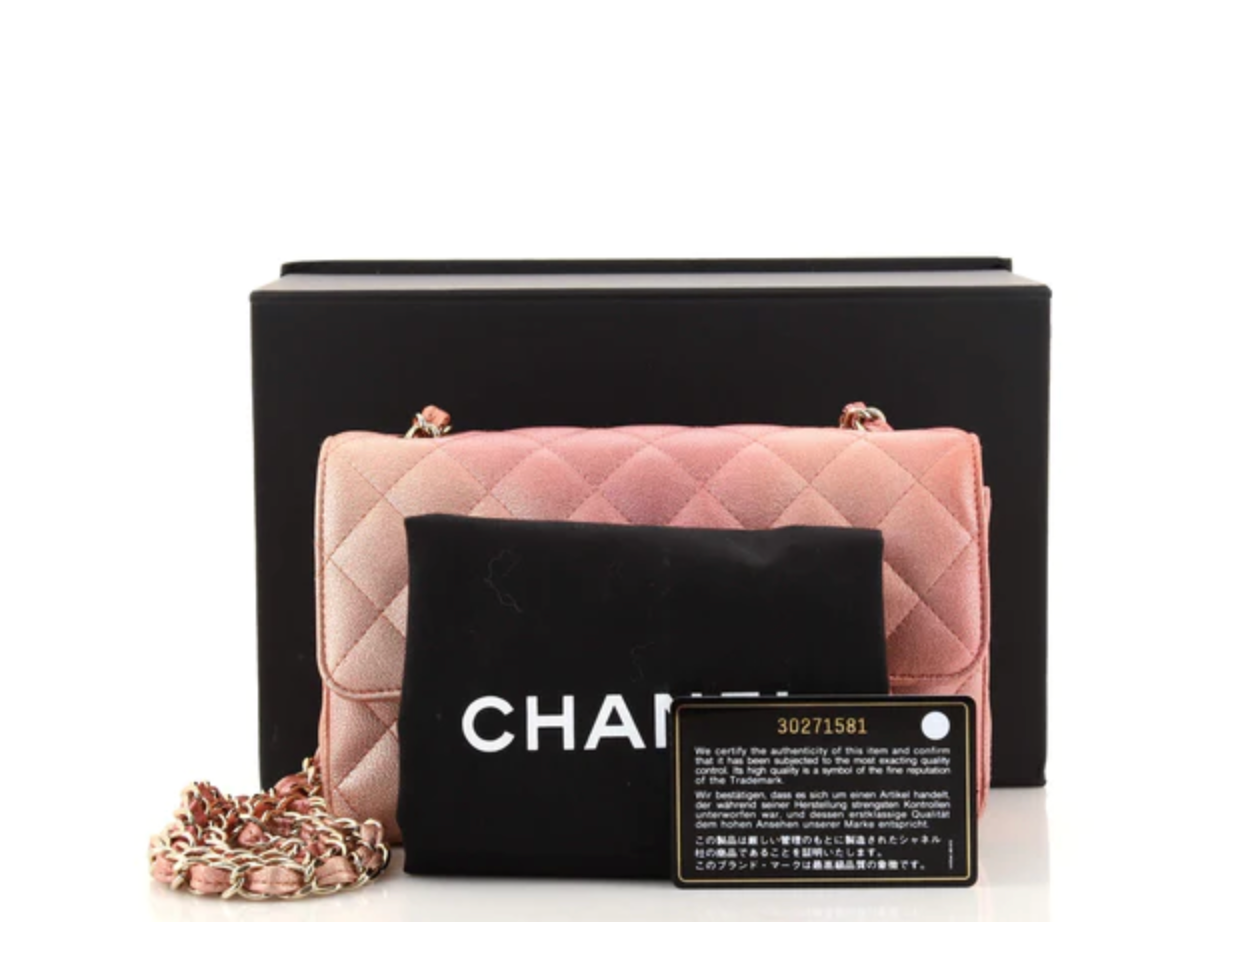 Chanel Metallic Pink Quilted Leather Extra Mini Classic Flap Bag Chanel